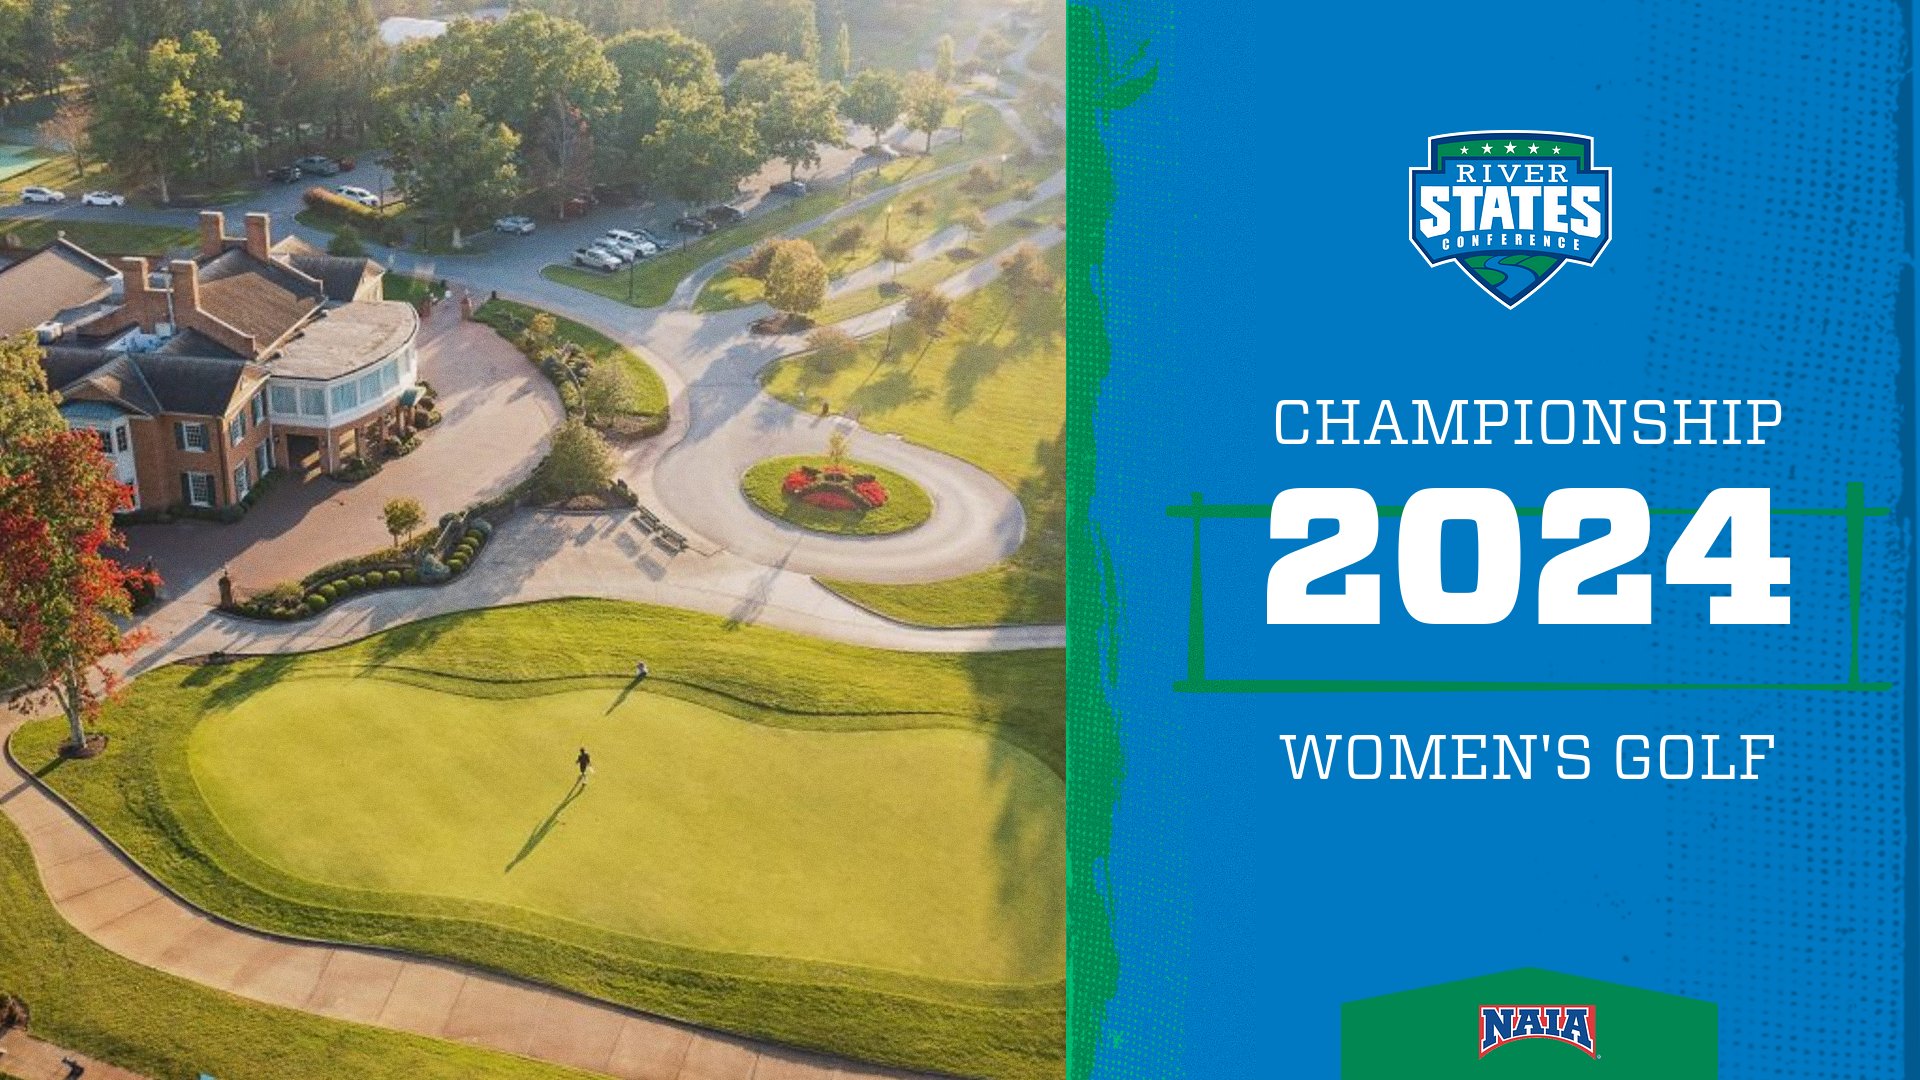 RSC Women's Golf Championship 2024: April 21-23 at The Resort at Glade Springs